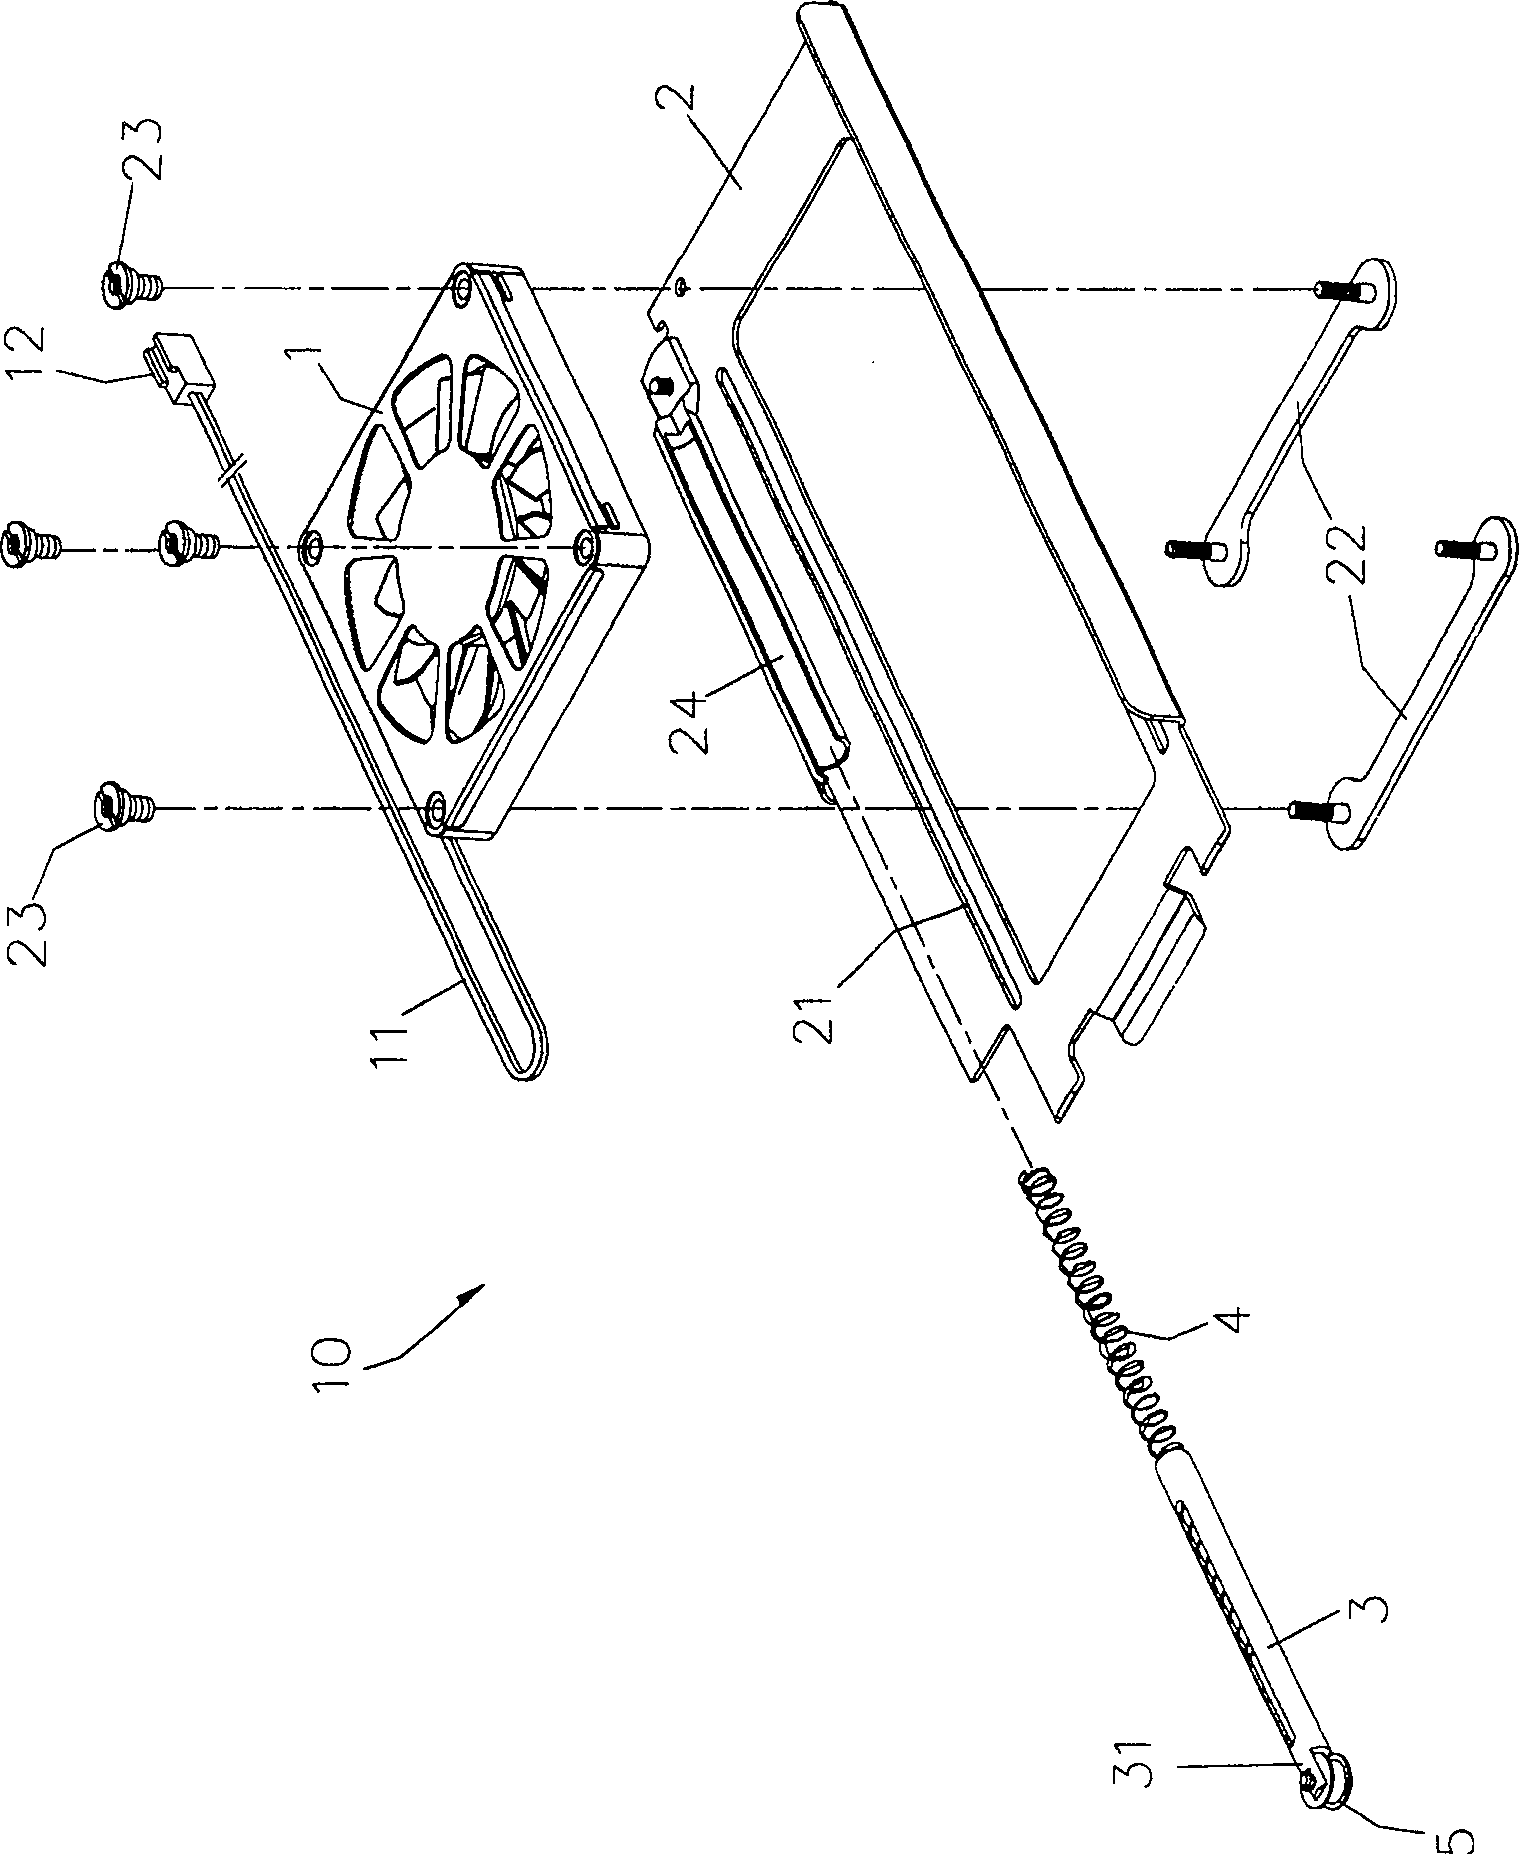 Power wire finishing device